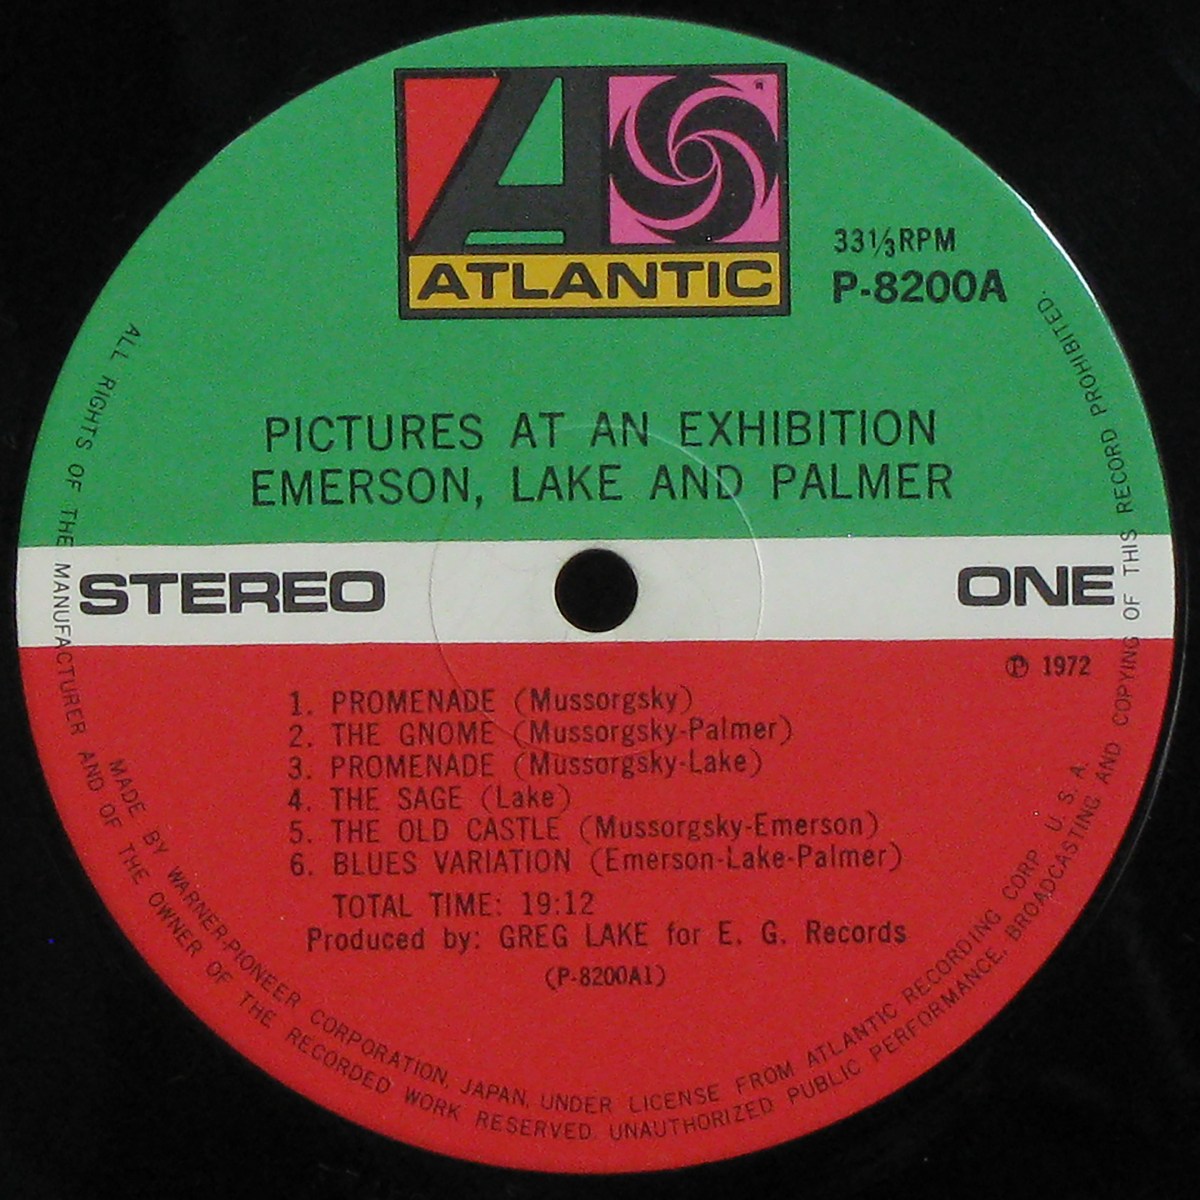 LP Emerson, Lake & Palmer — Pictures At An Exhibition фото 2